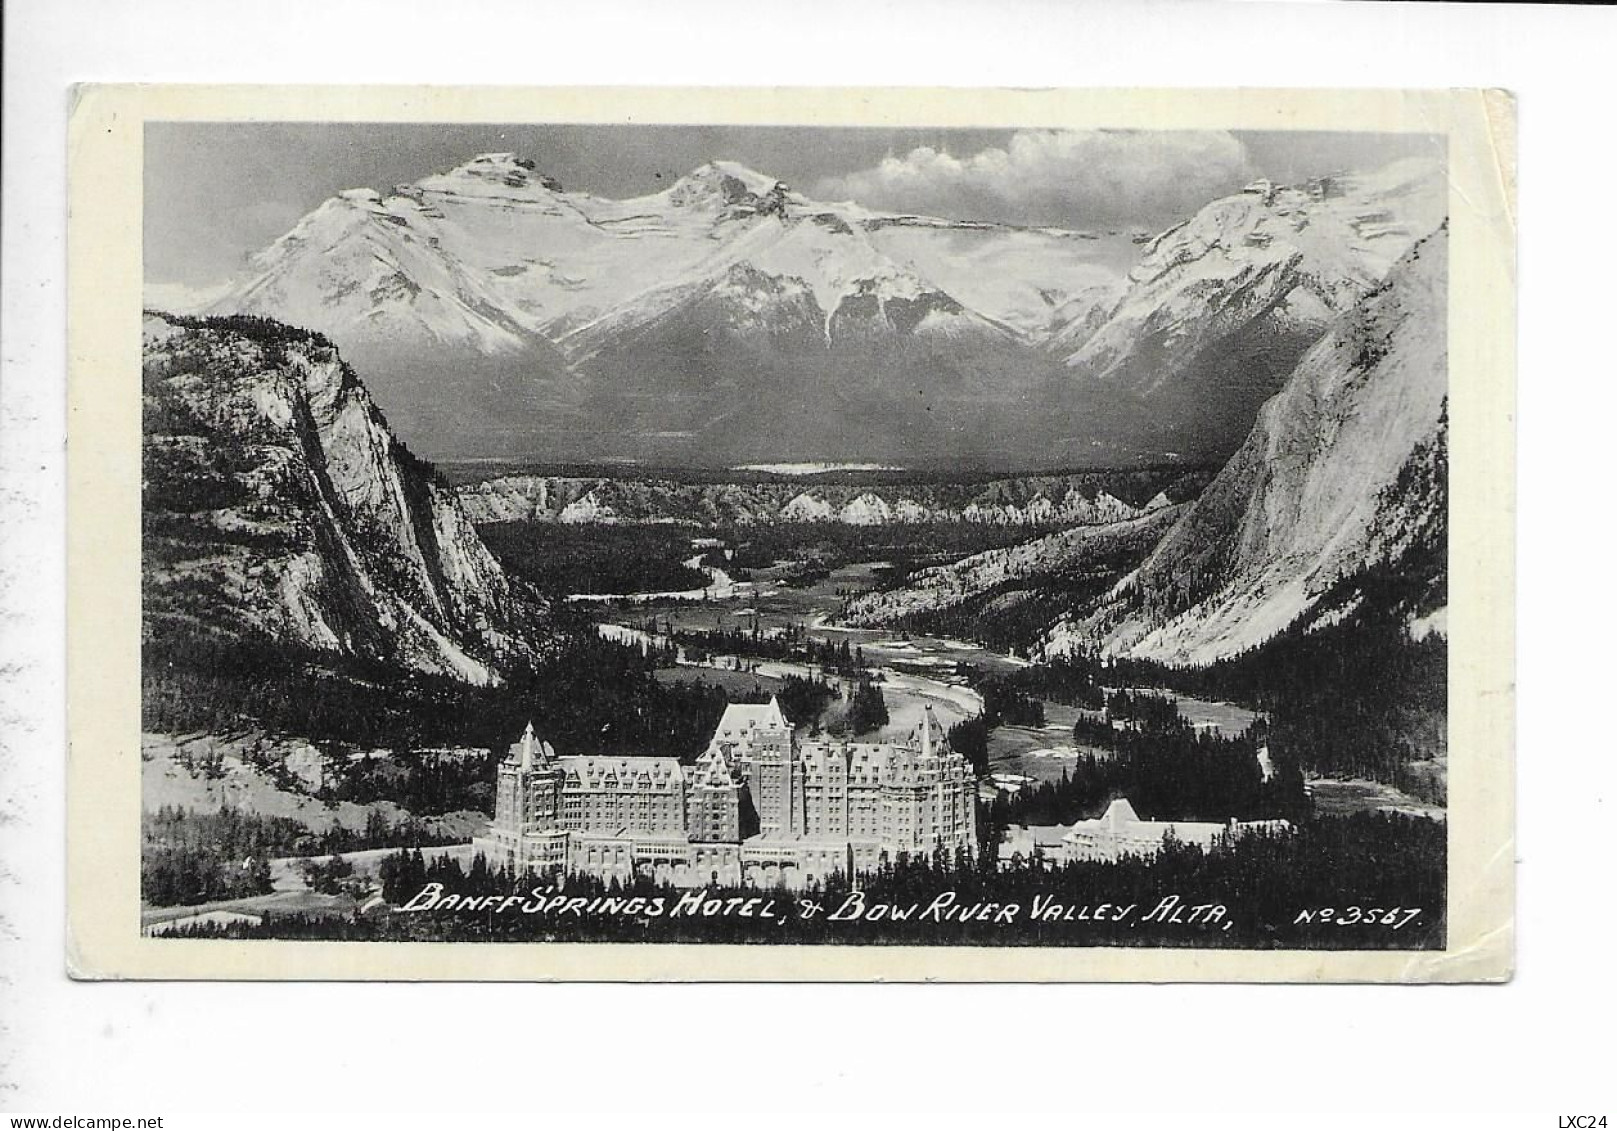 BANFF SPRINGS HOTEL. BOW RIVER VALLEY. - Banff